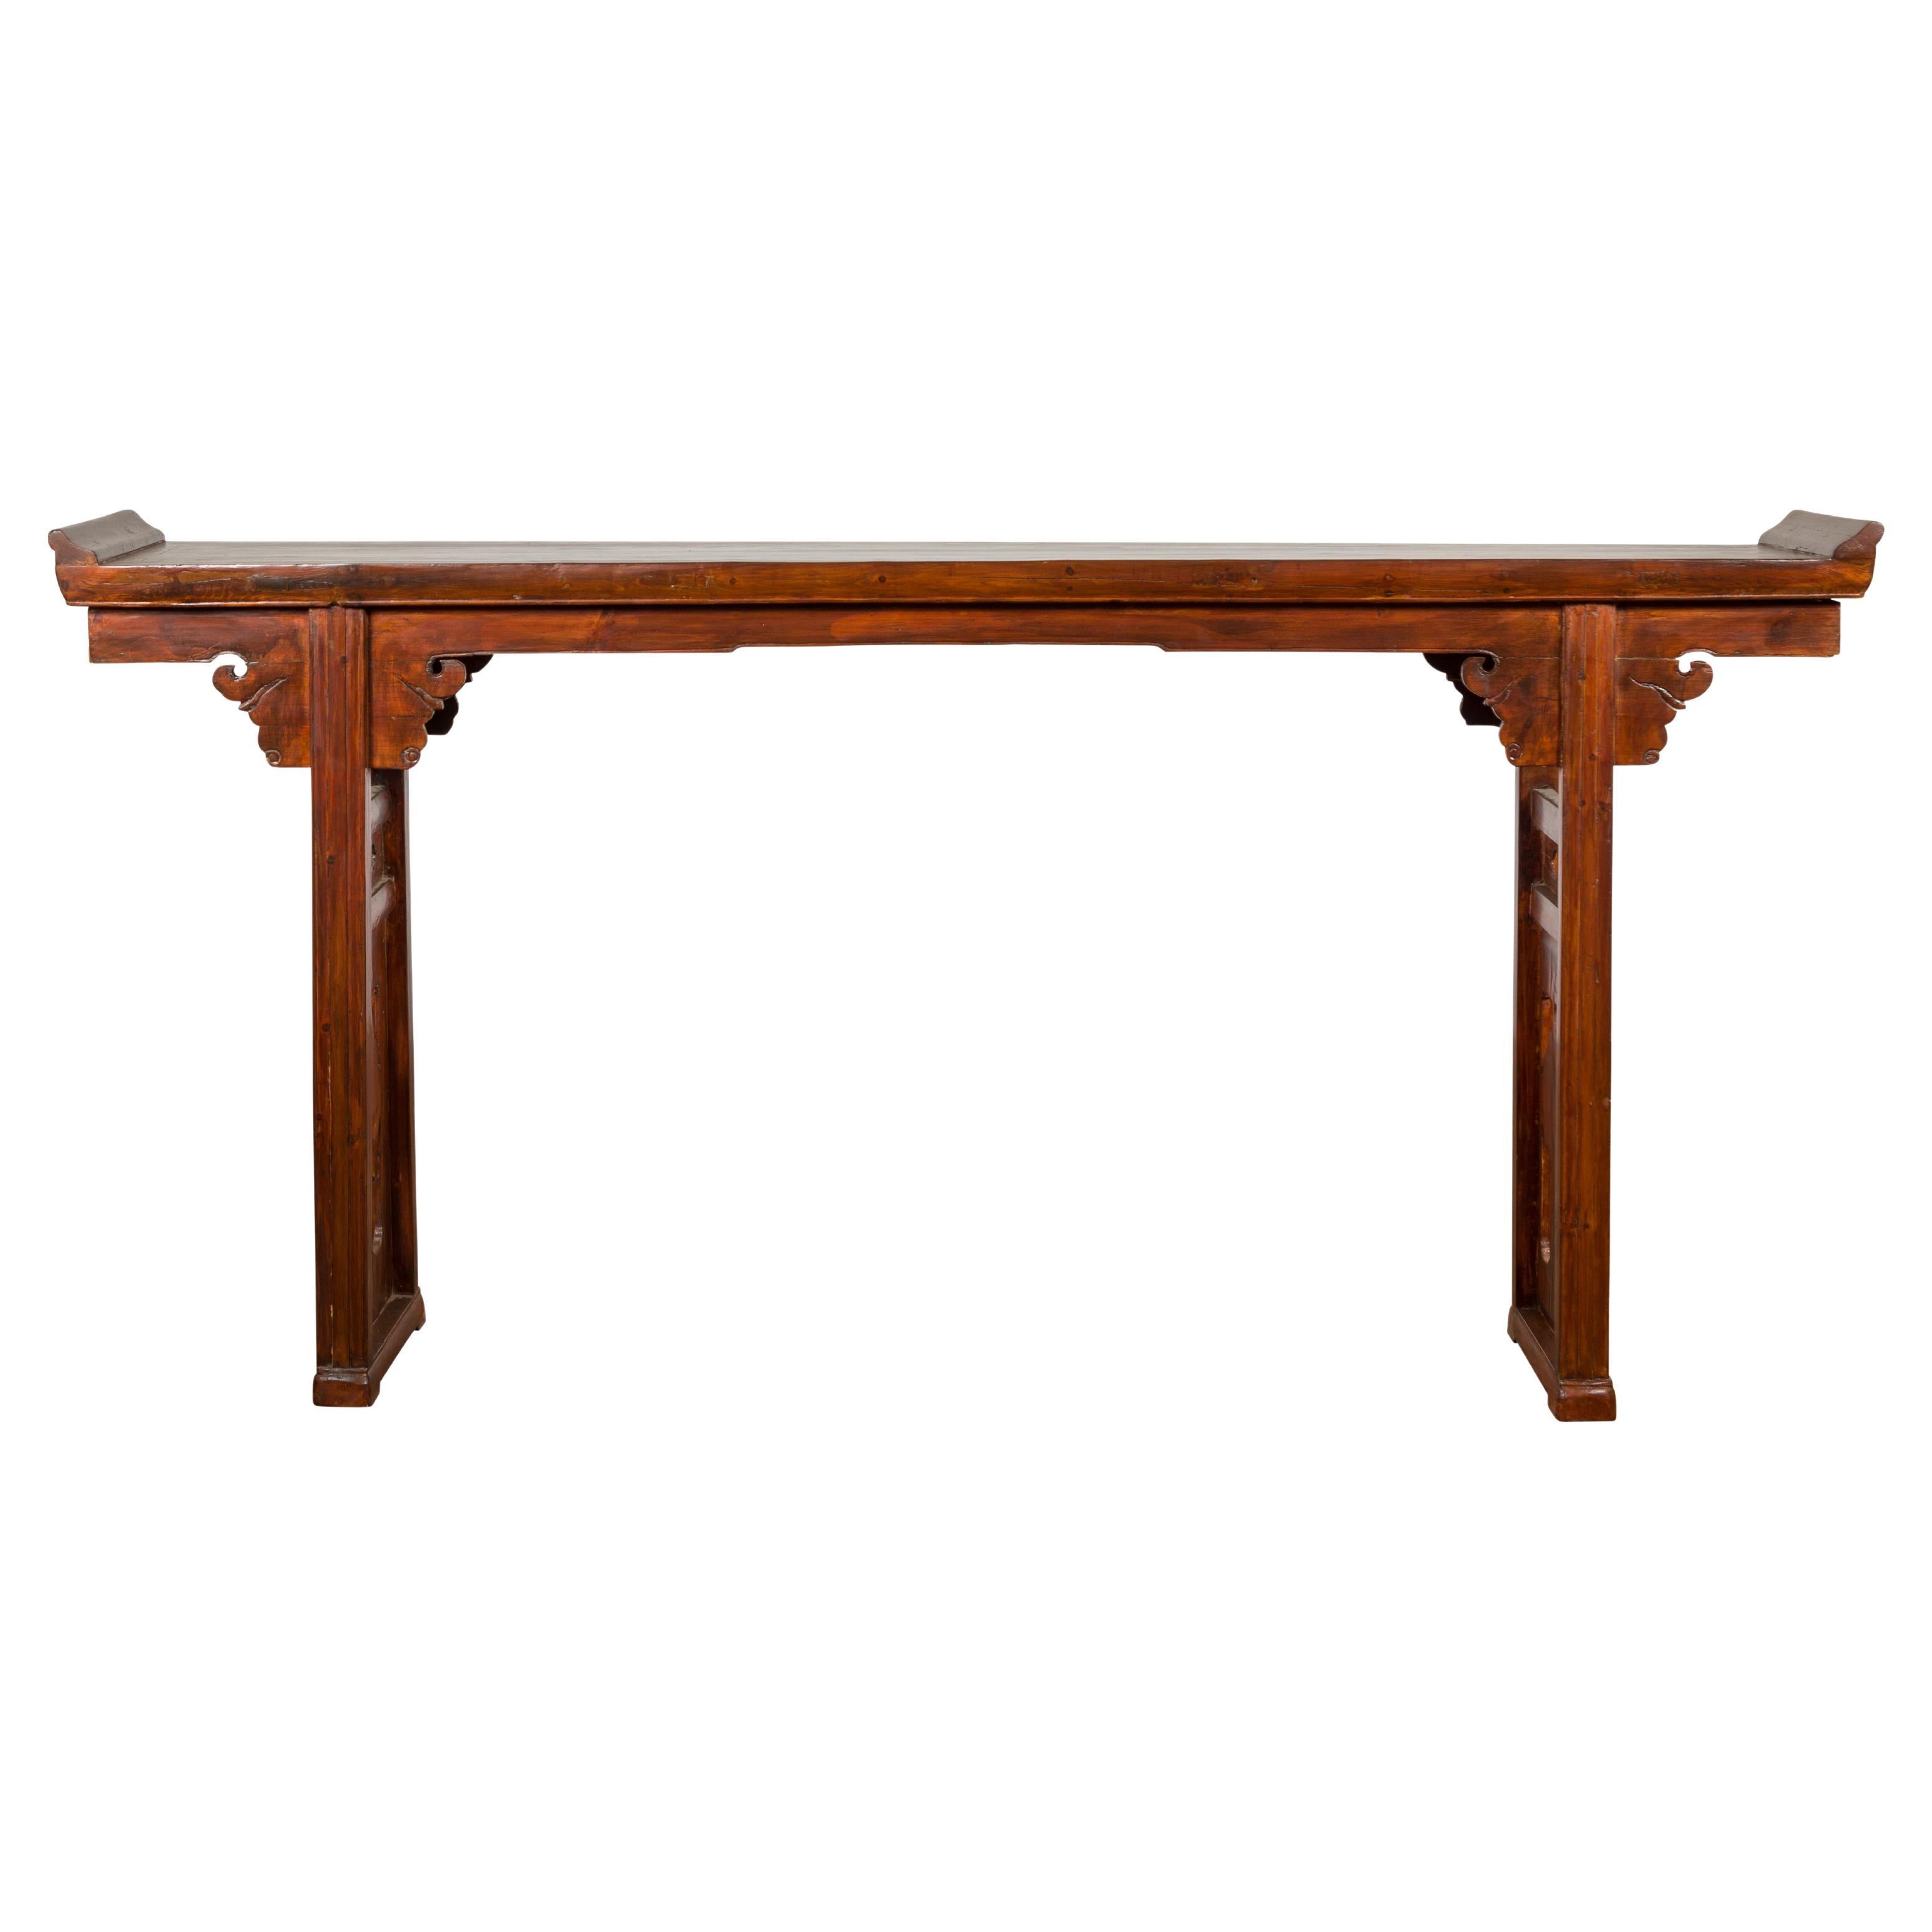 Chinese Late Qing Dynasty Altar Console Table with Lateral Pierced Tree Motifs